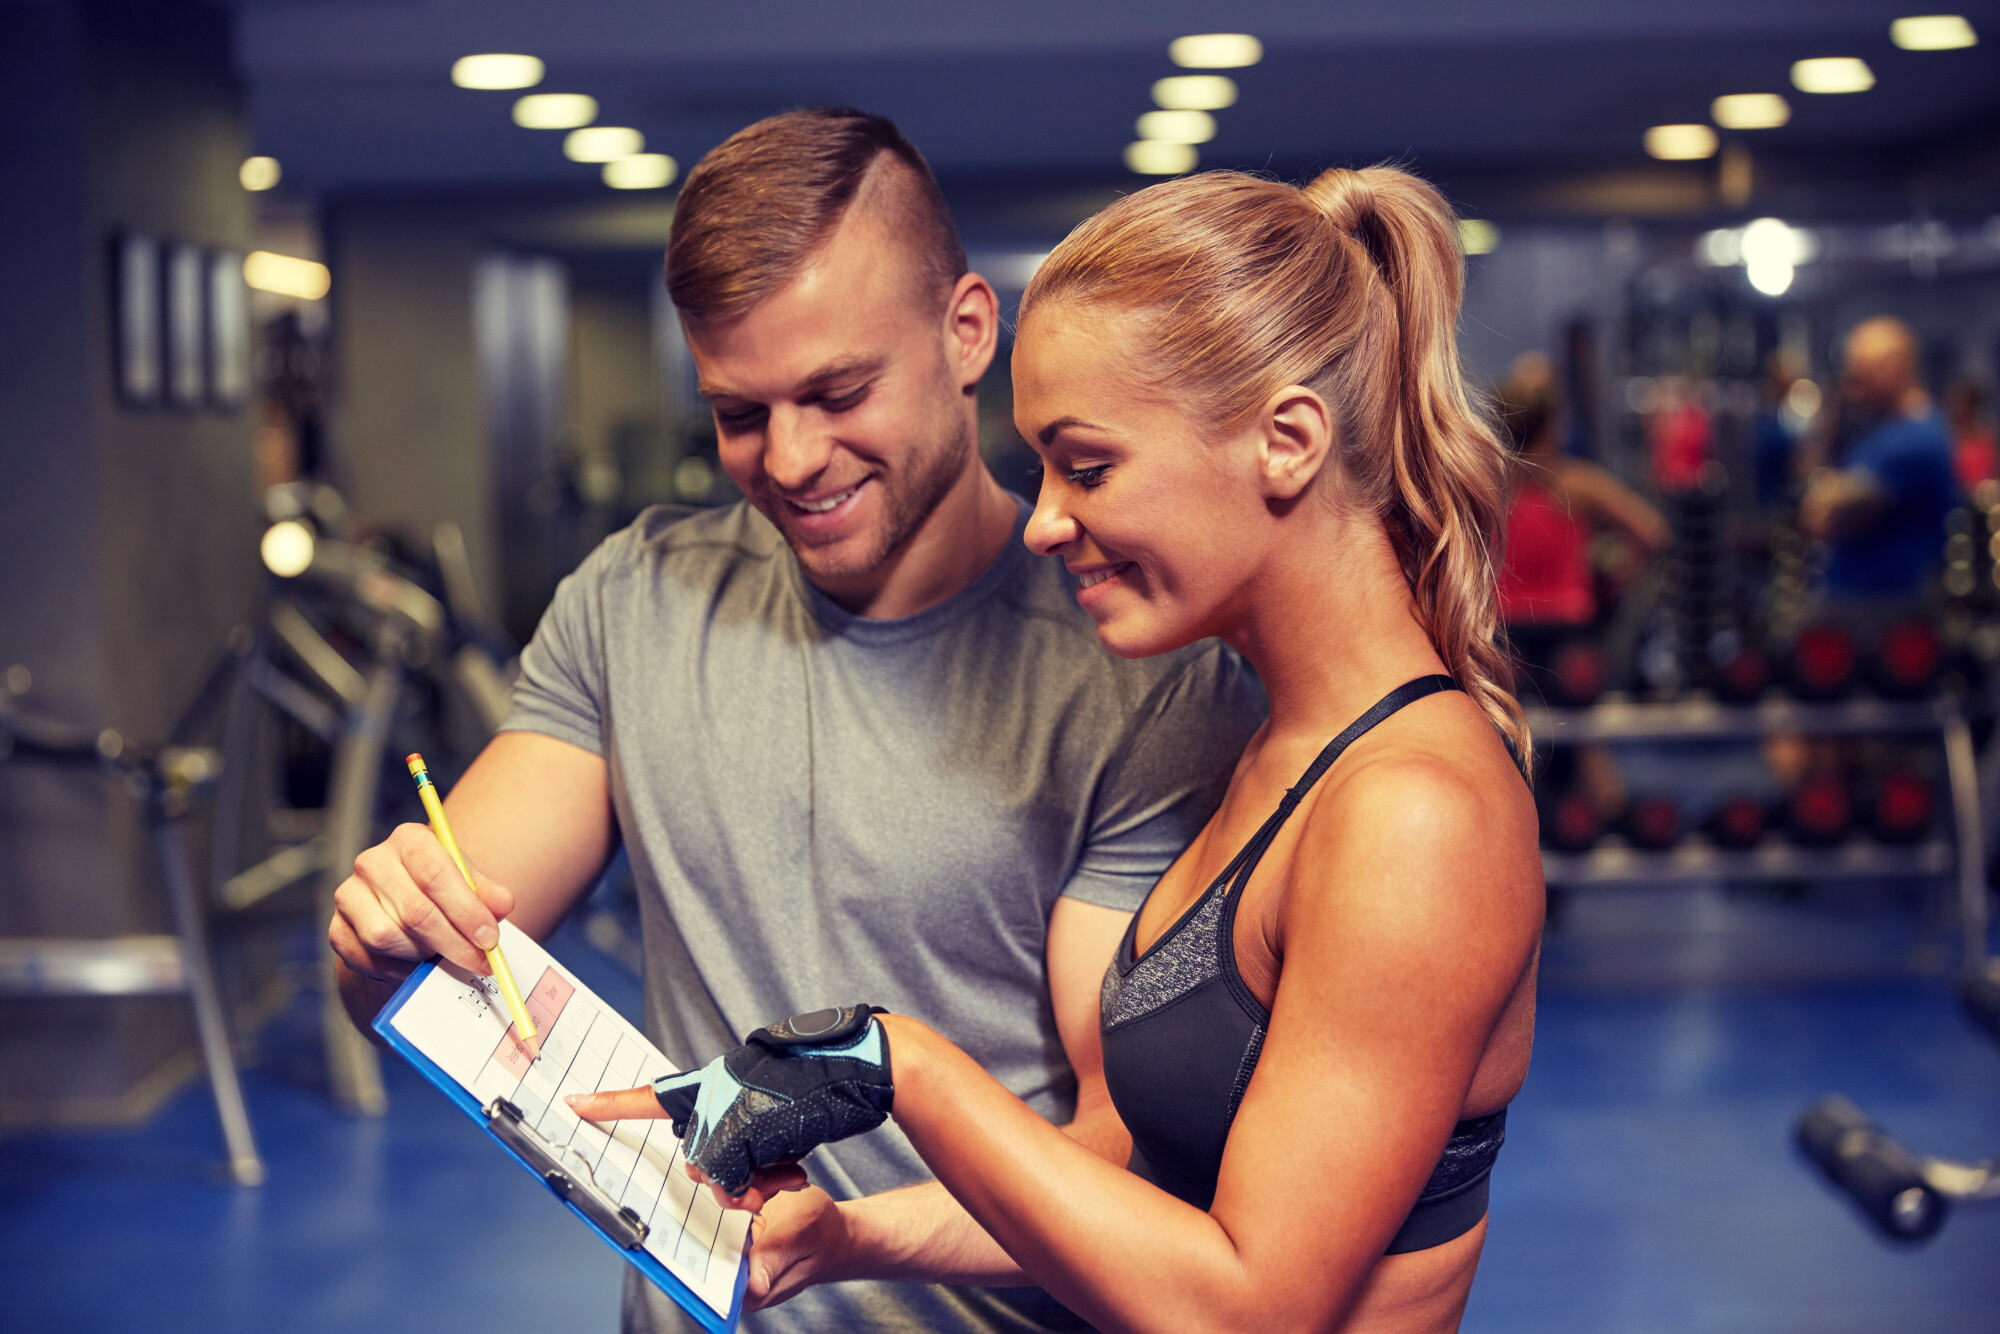 4 Ways Clients Benefit From Live Fitness Instruction